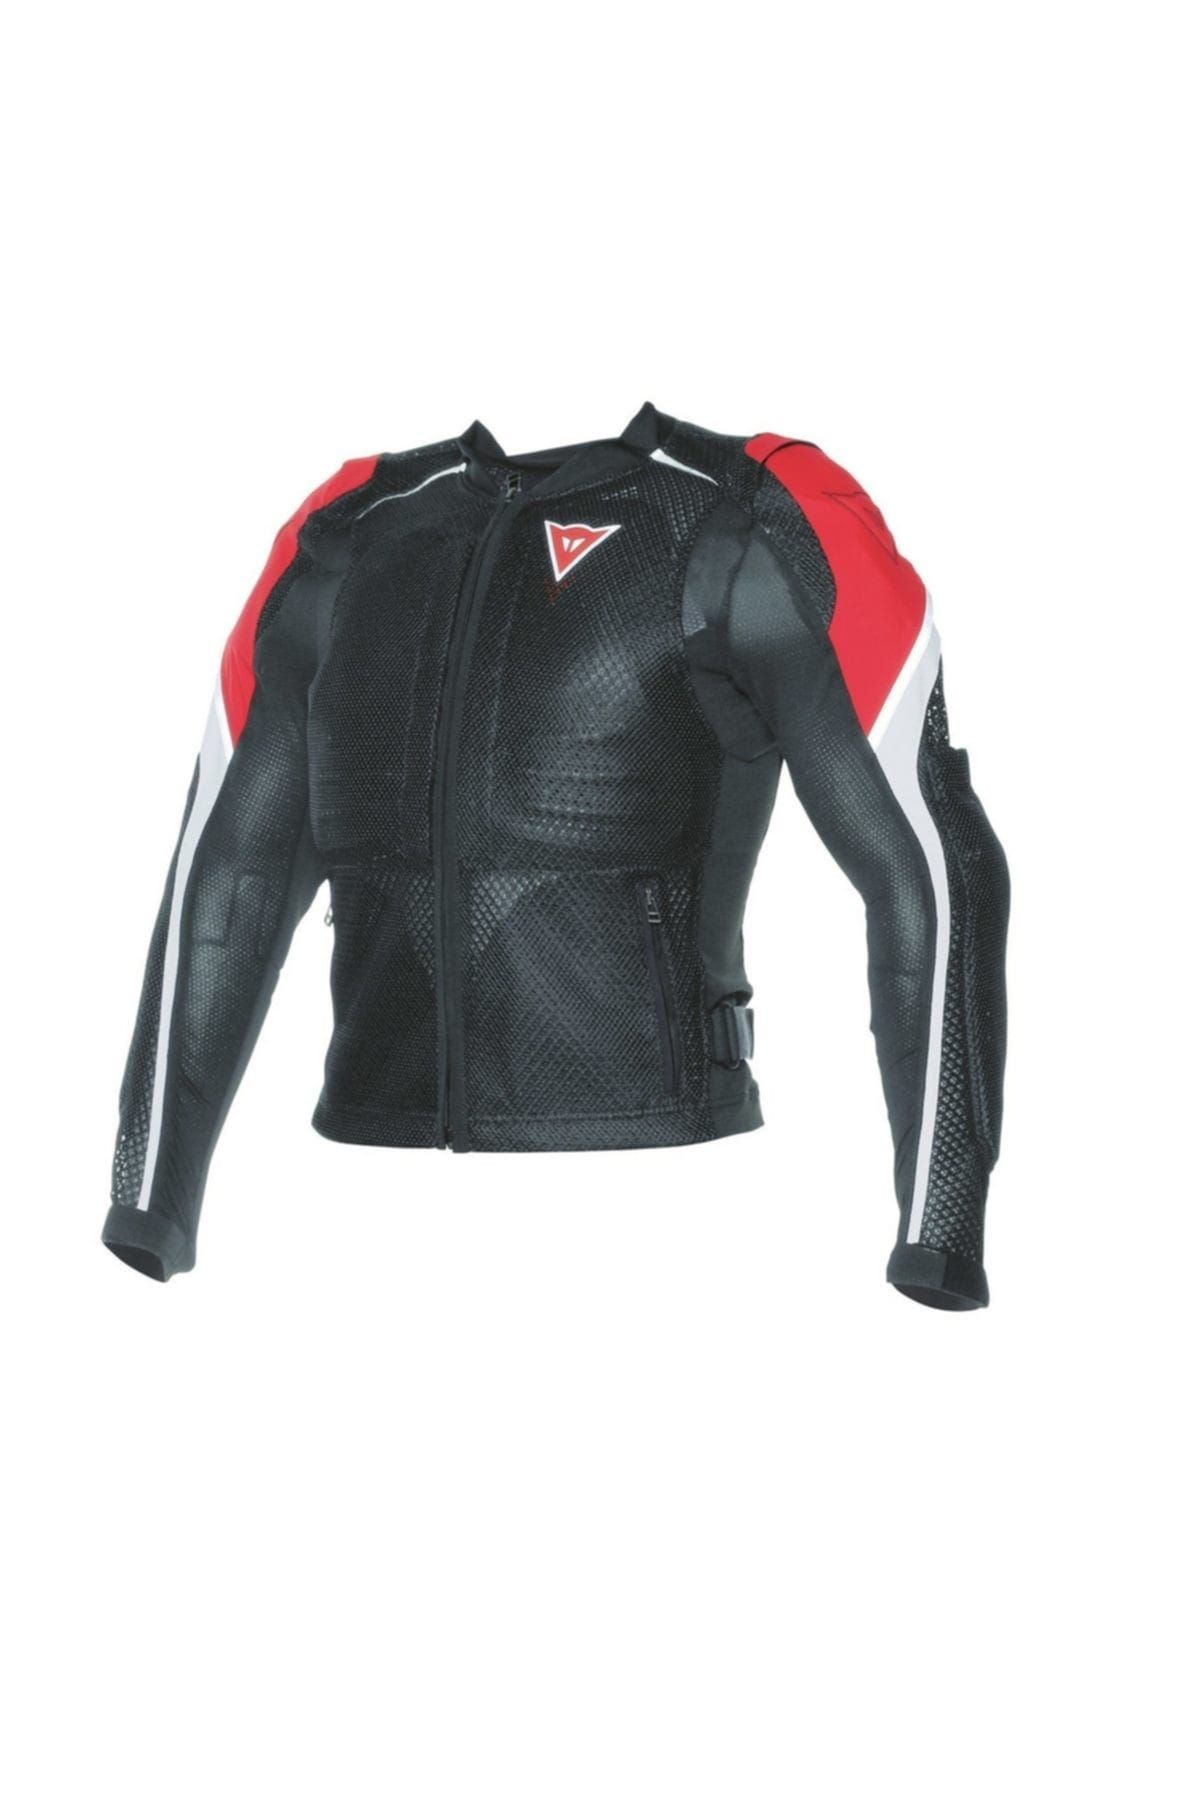 Dainese Sport Guard Black Red